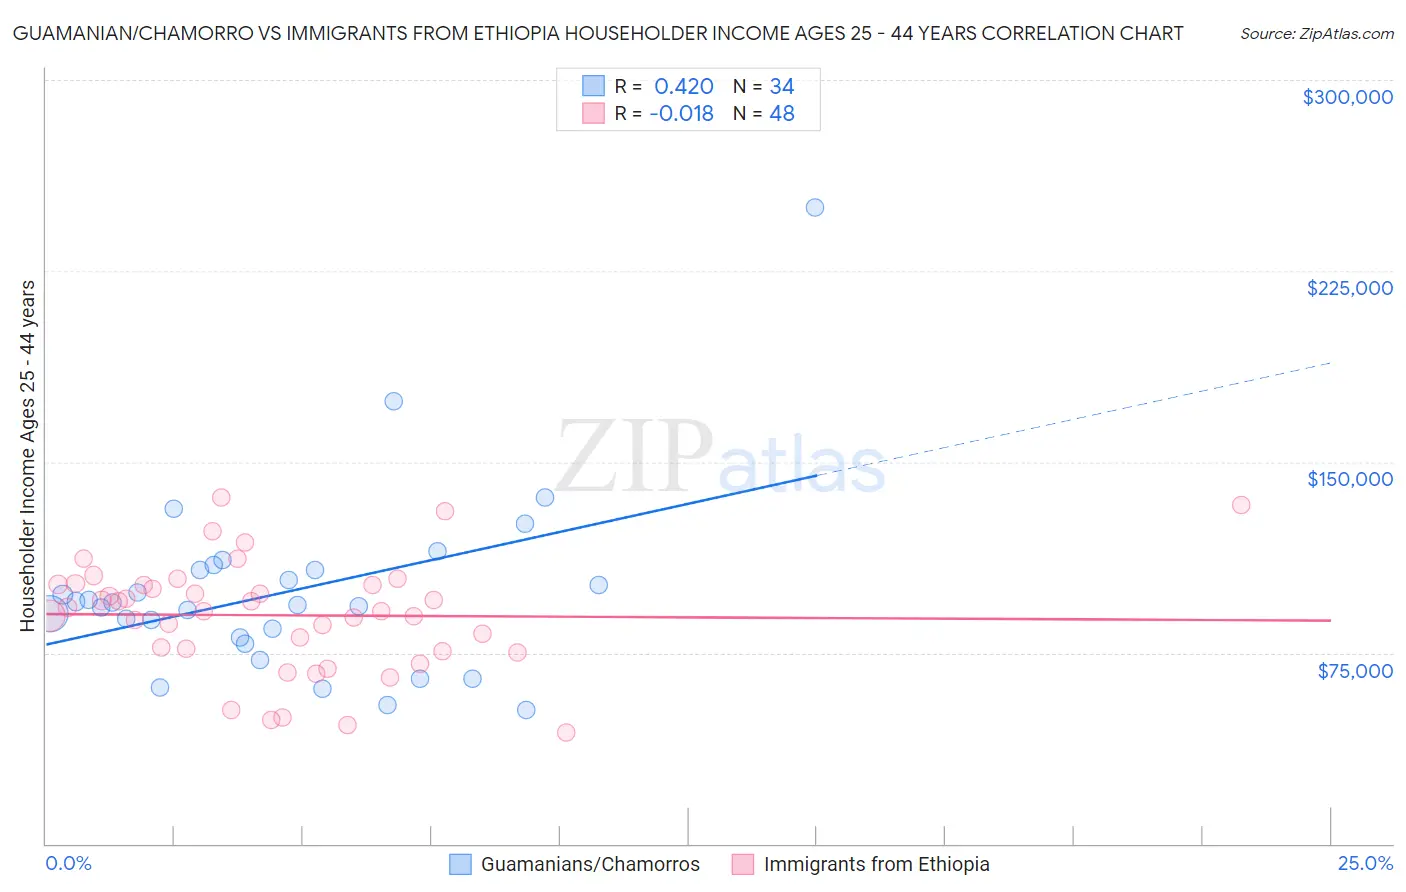 Guamanian/Chamorro vs Immigrants from Ethiopia Householder Income Ages 25 - 44 years